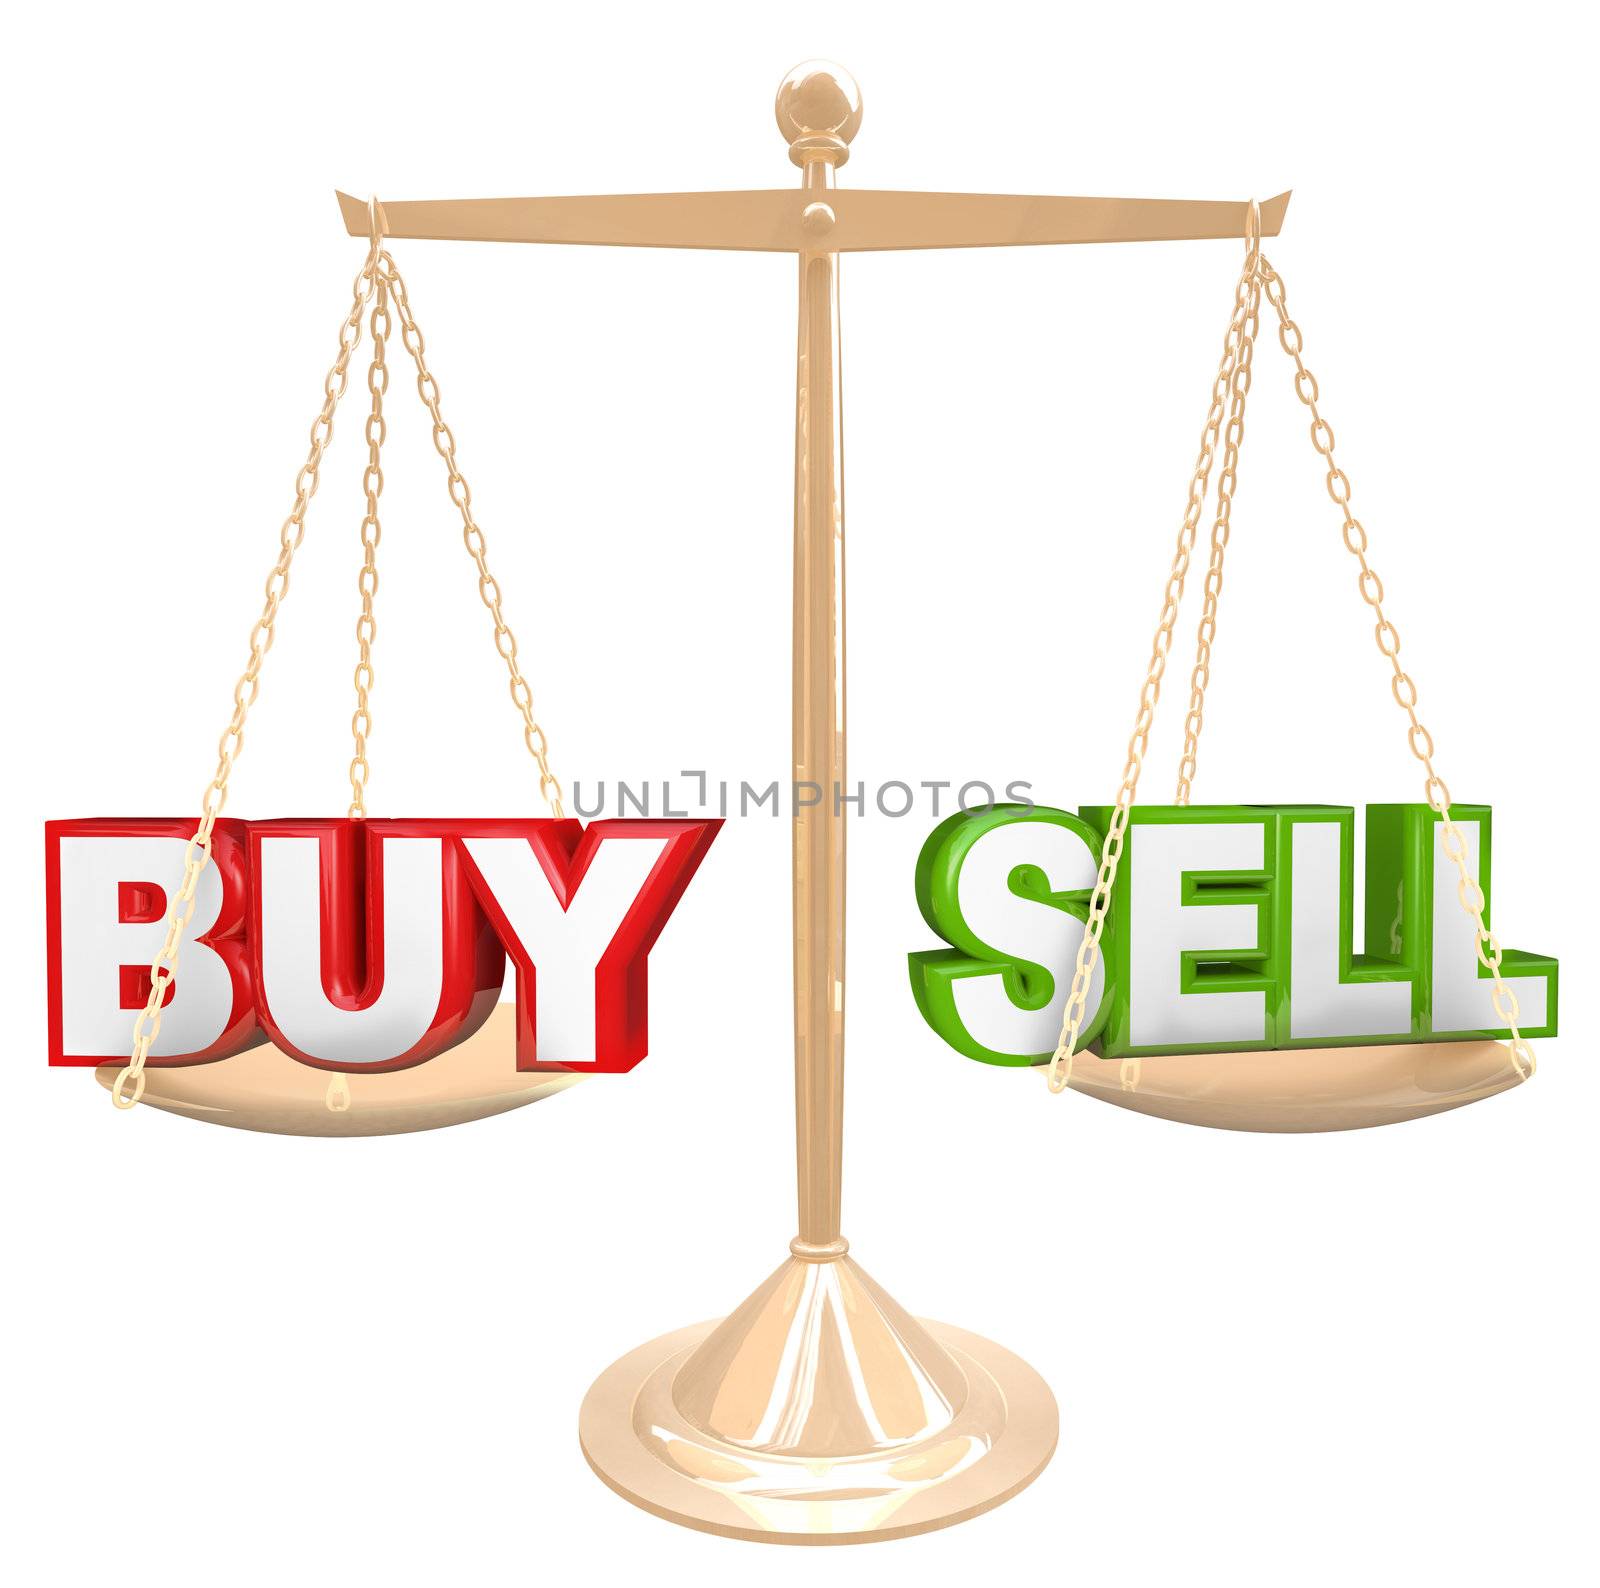 The words Buy and Sell on a gold scale comparing the risks and benefits of timing your buying and selling of an item such as a house or financial investment